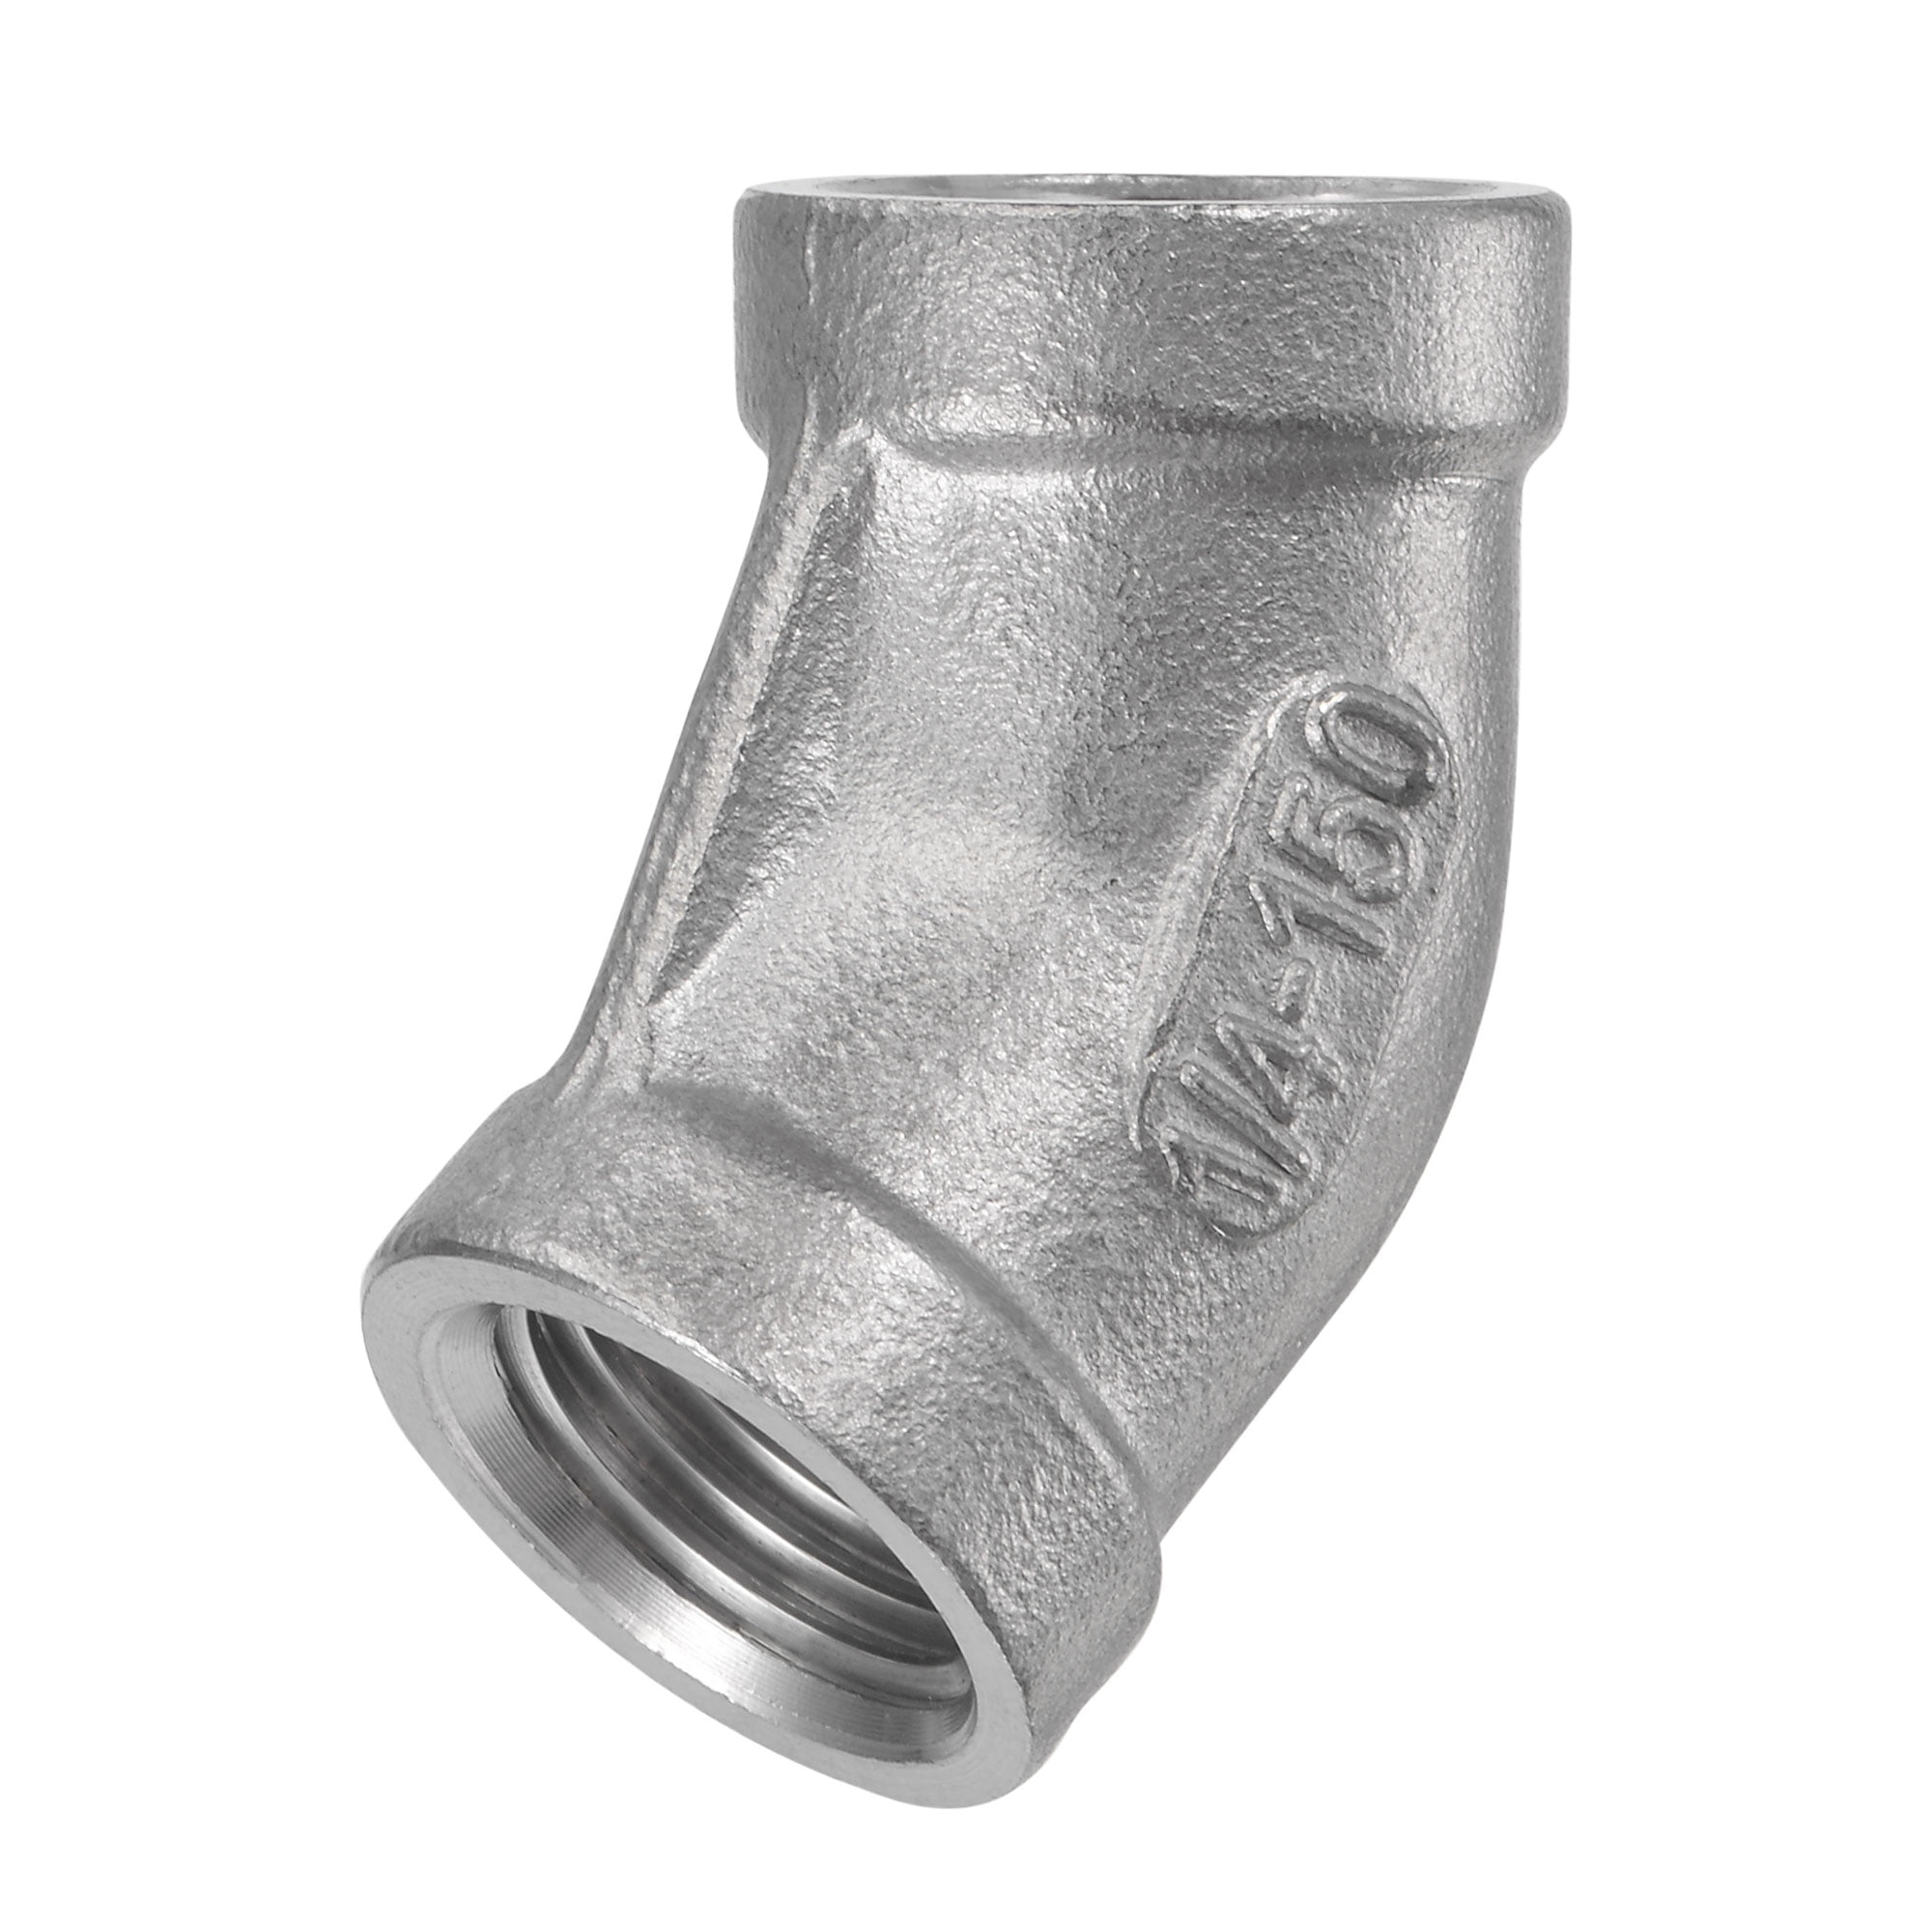 3-Way Stainless Steel T-Connector with 1/2” NPT Threads For Pipe Installations 